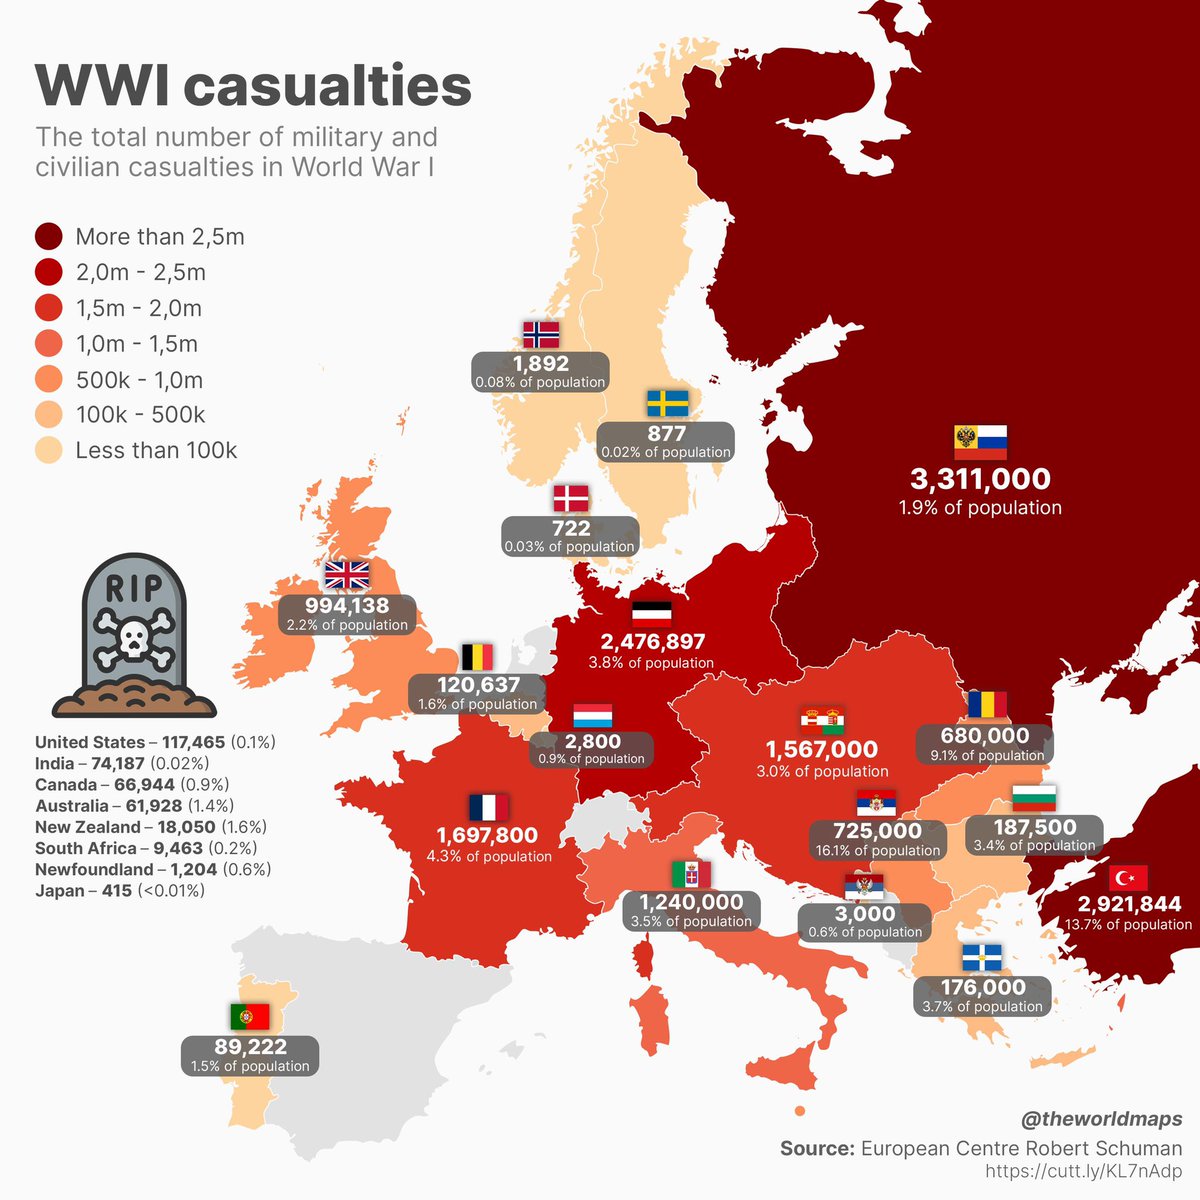 Today. the world marks 104 years since the end of WWI. 

Maps shows the % of populations killed during the conflict.